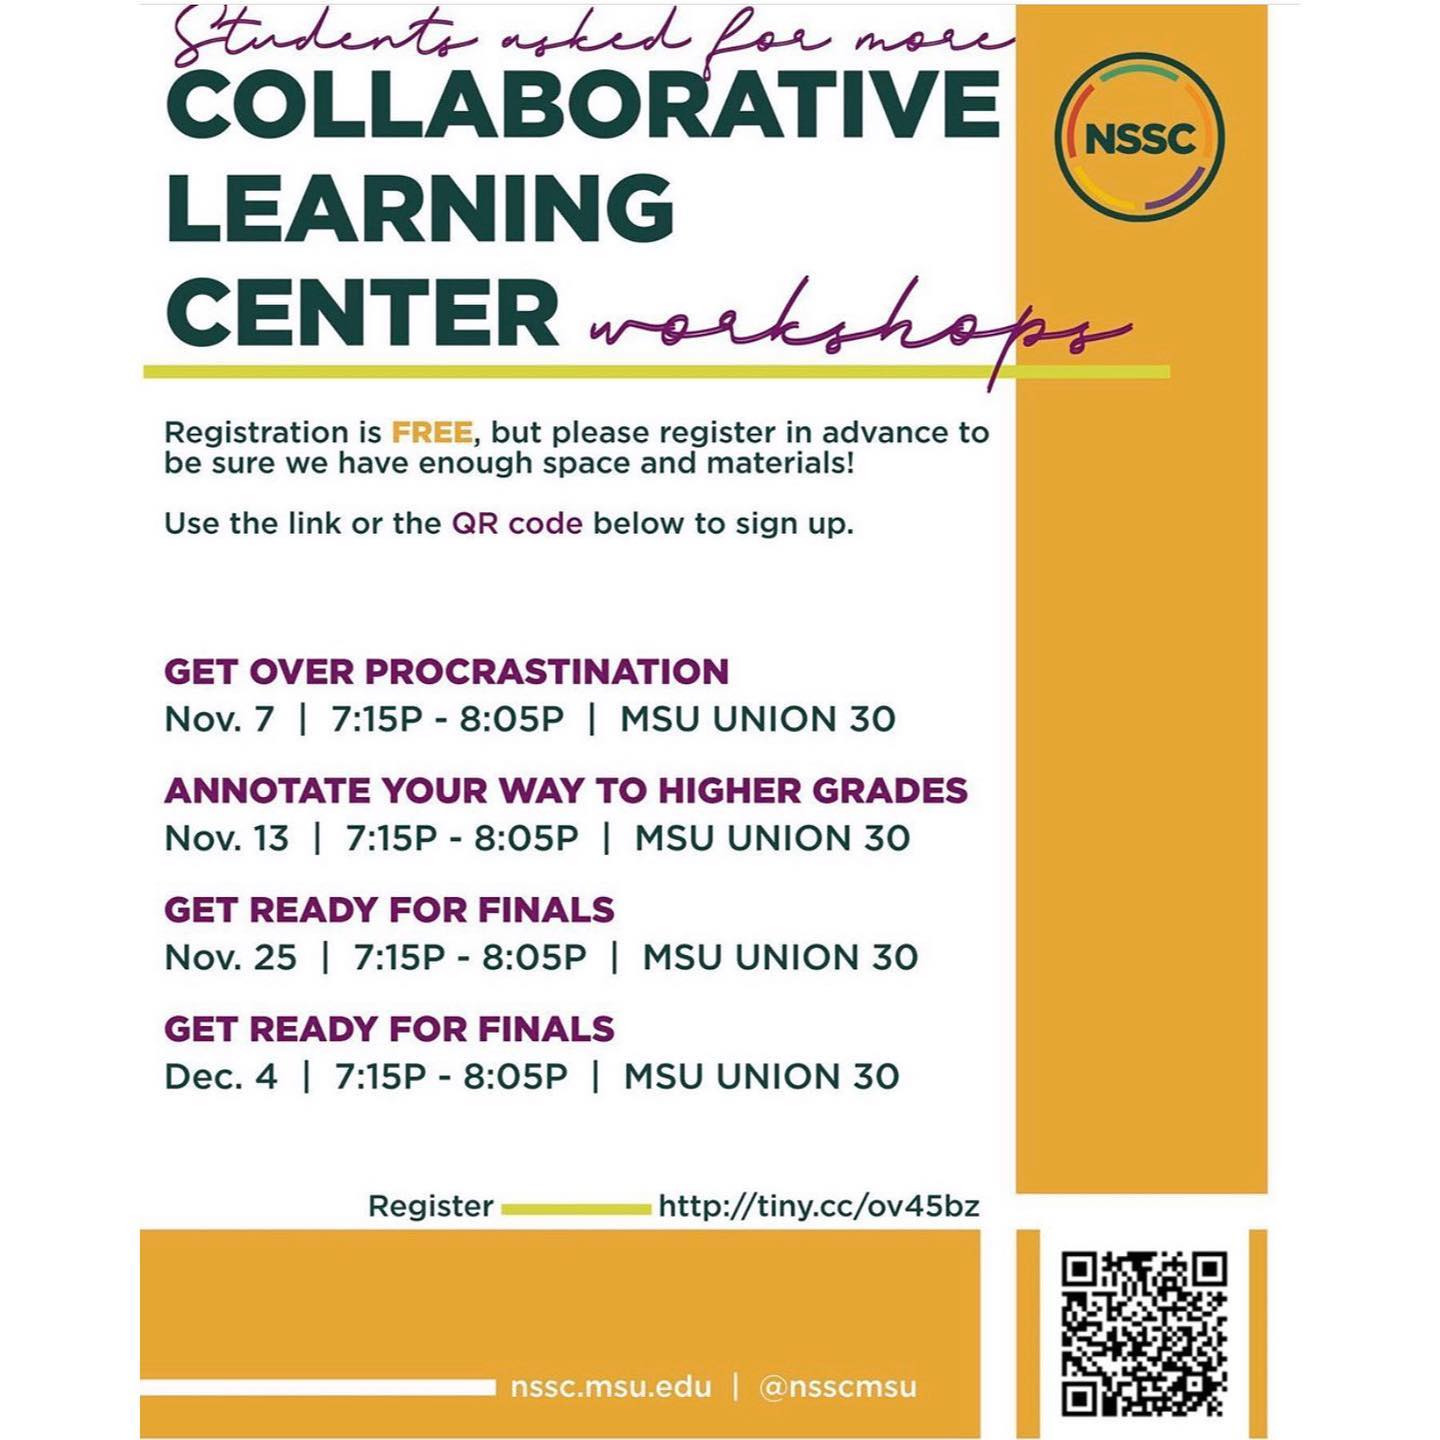 NSSC Get Ready For Finals – Collaborative Learning Center Workshop